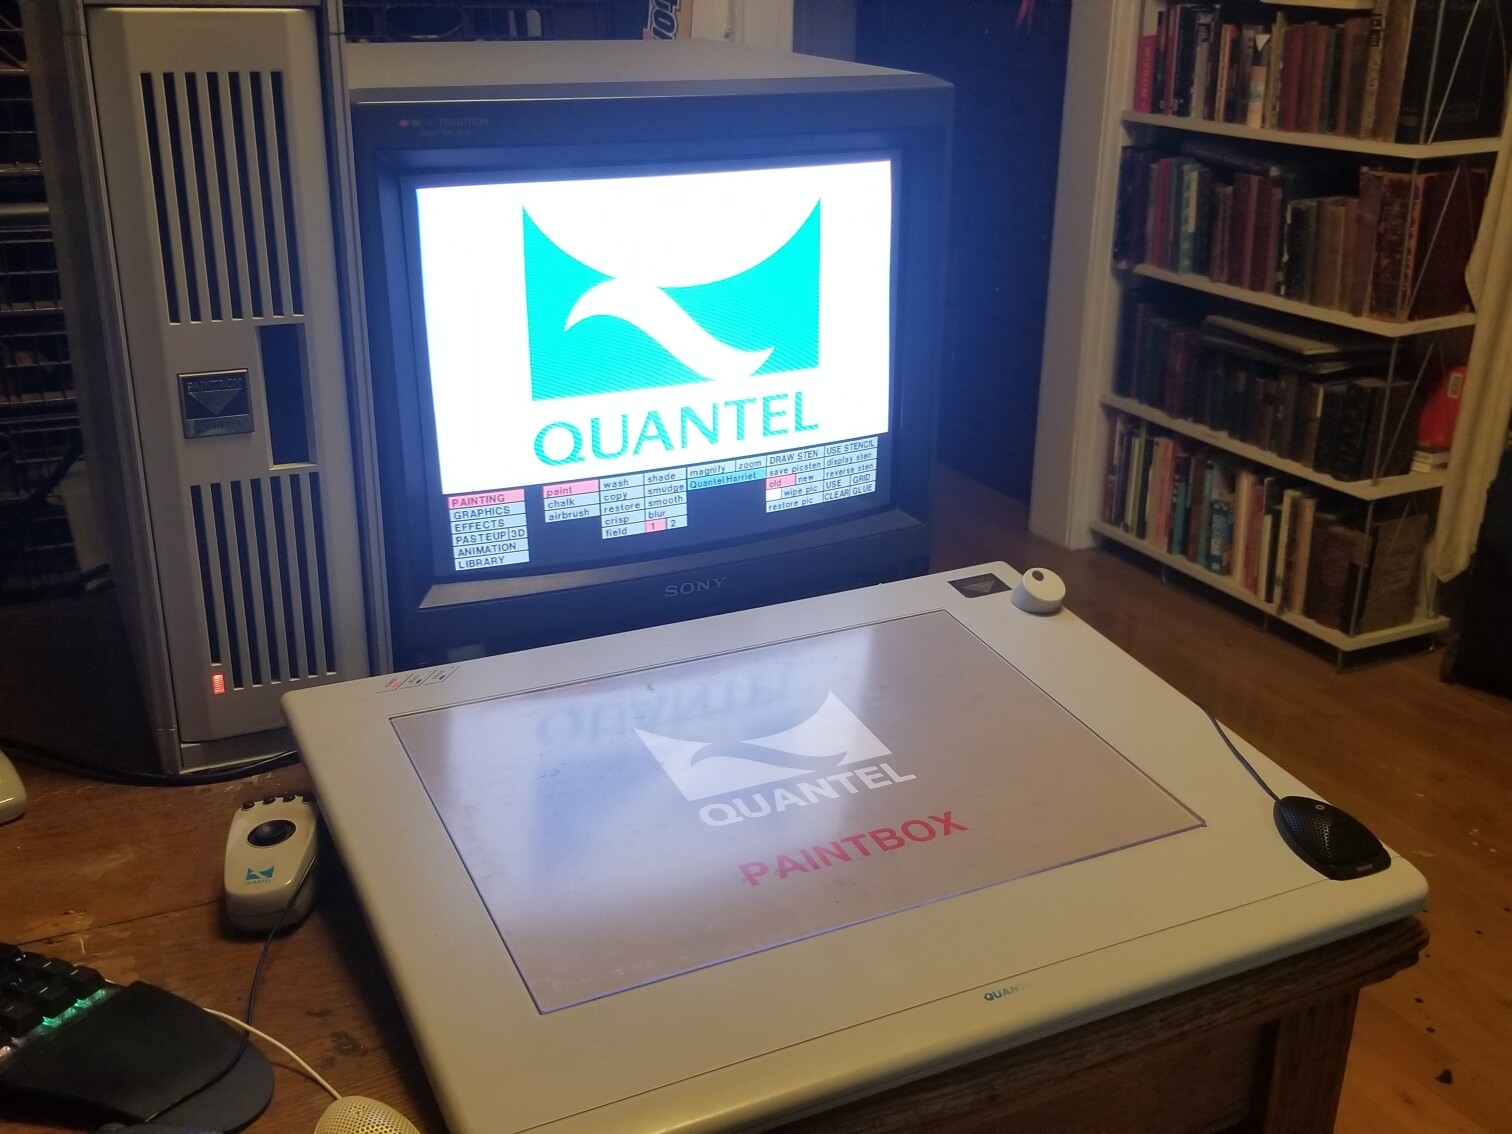 A Quantel Harriet Paintbox with tablet and CRT display.